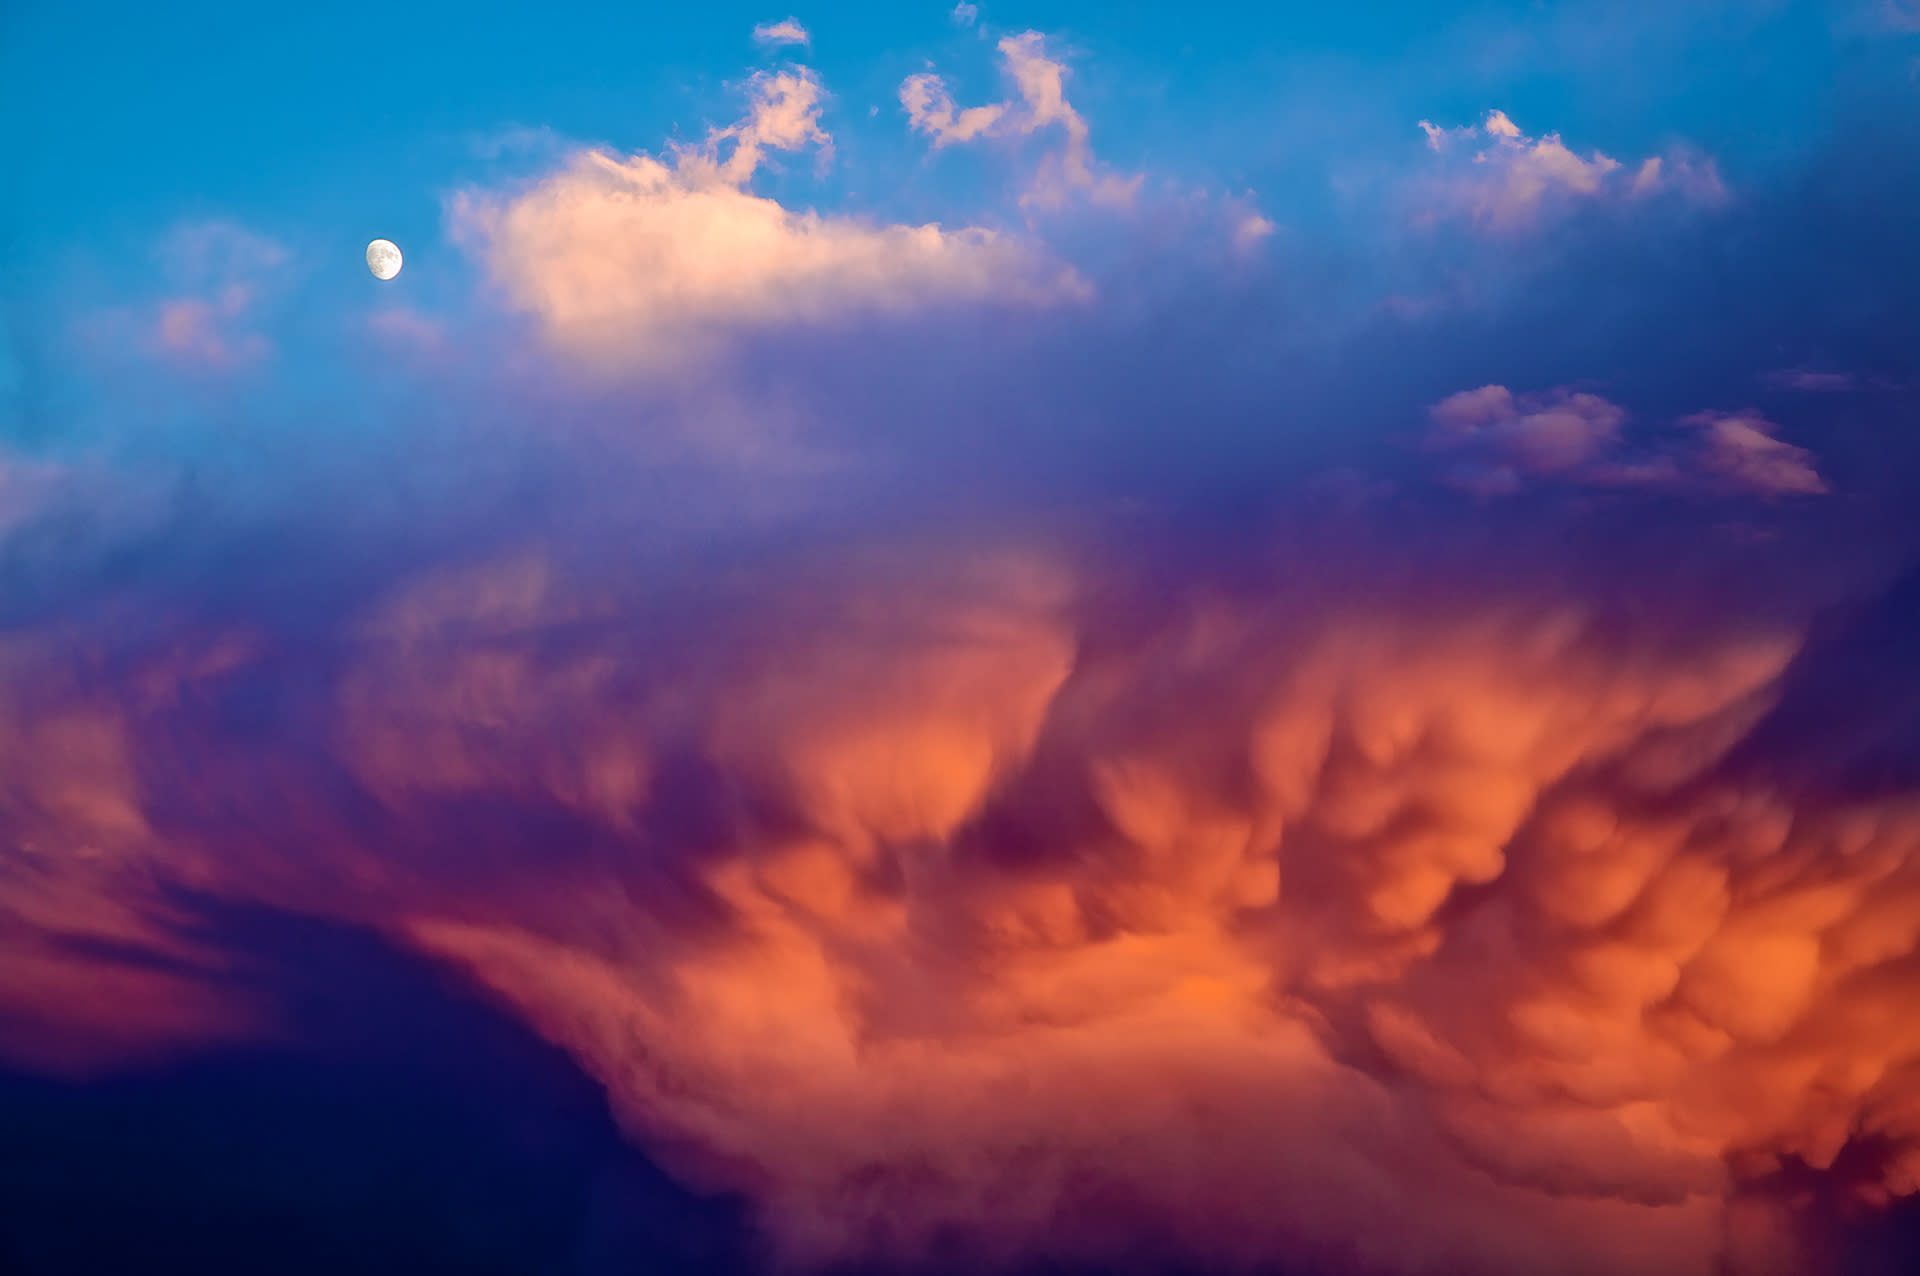 
        <div class='title'>
          Moon over stormclouds
        </div>
       